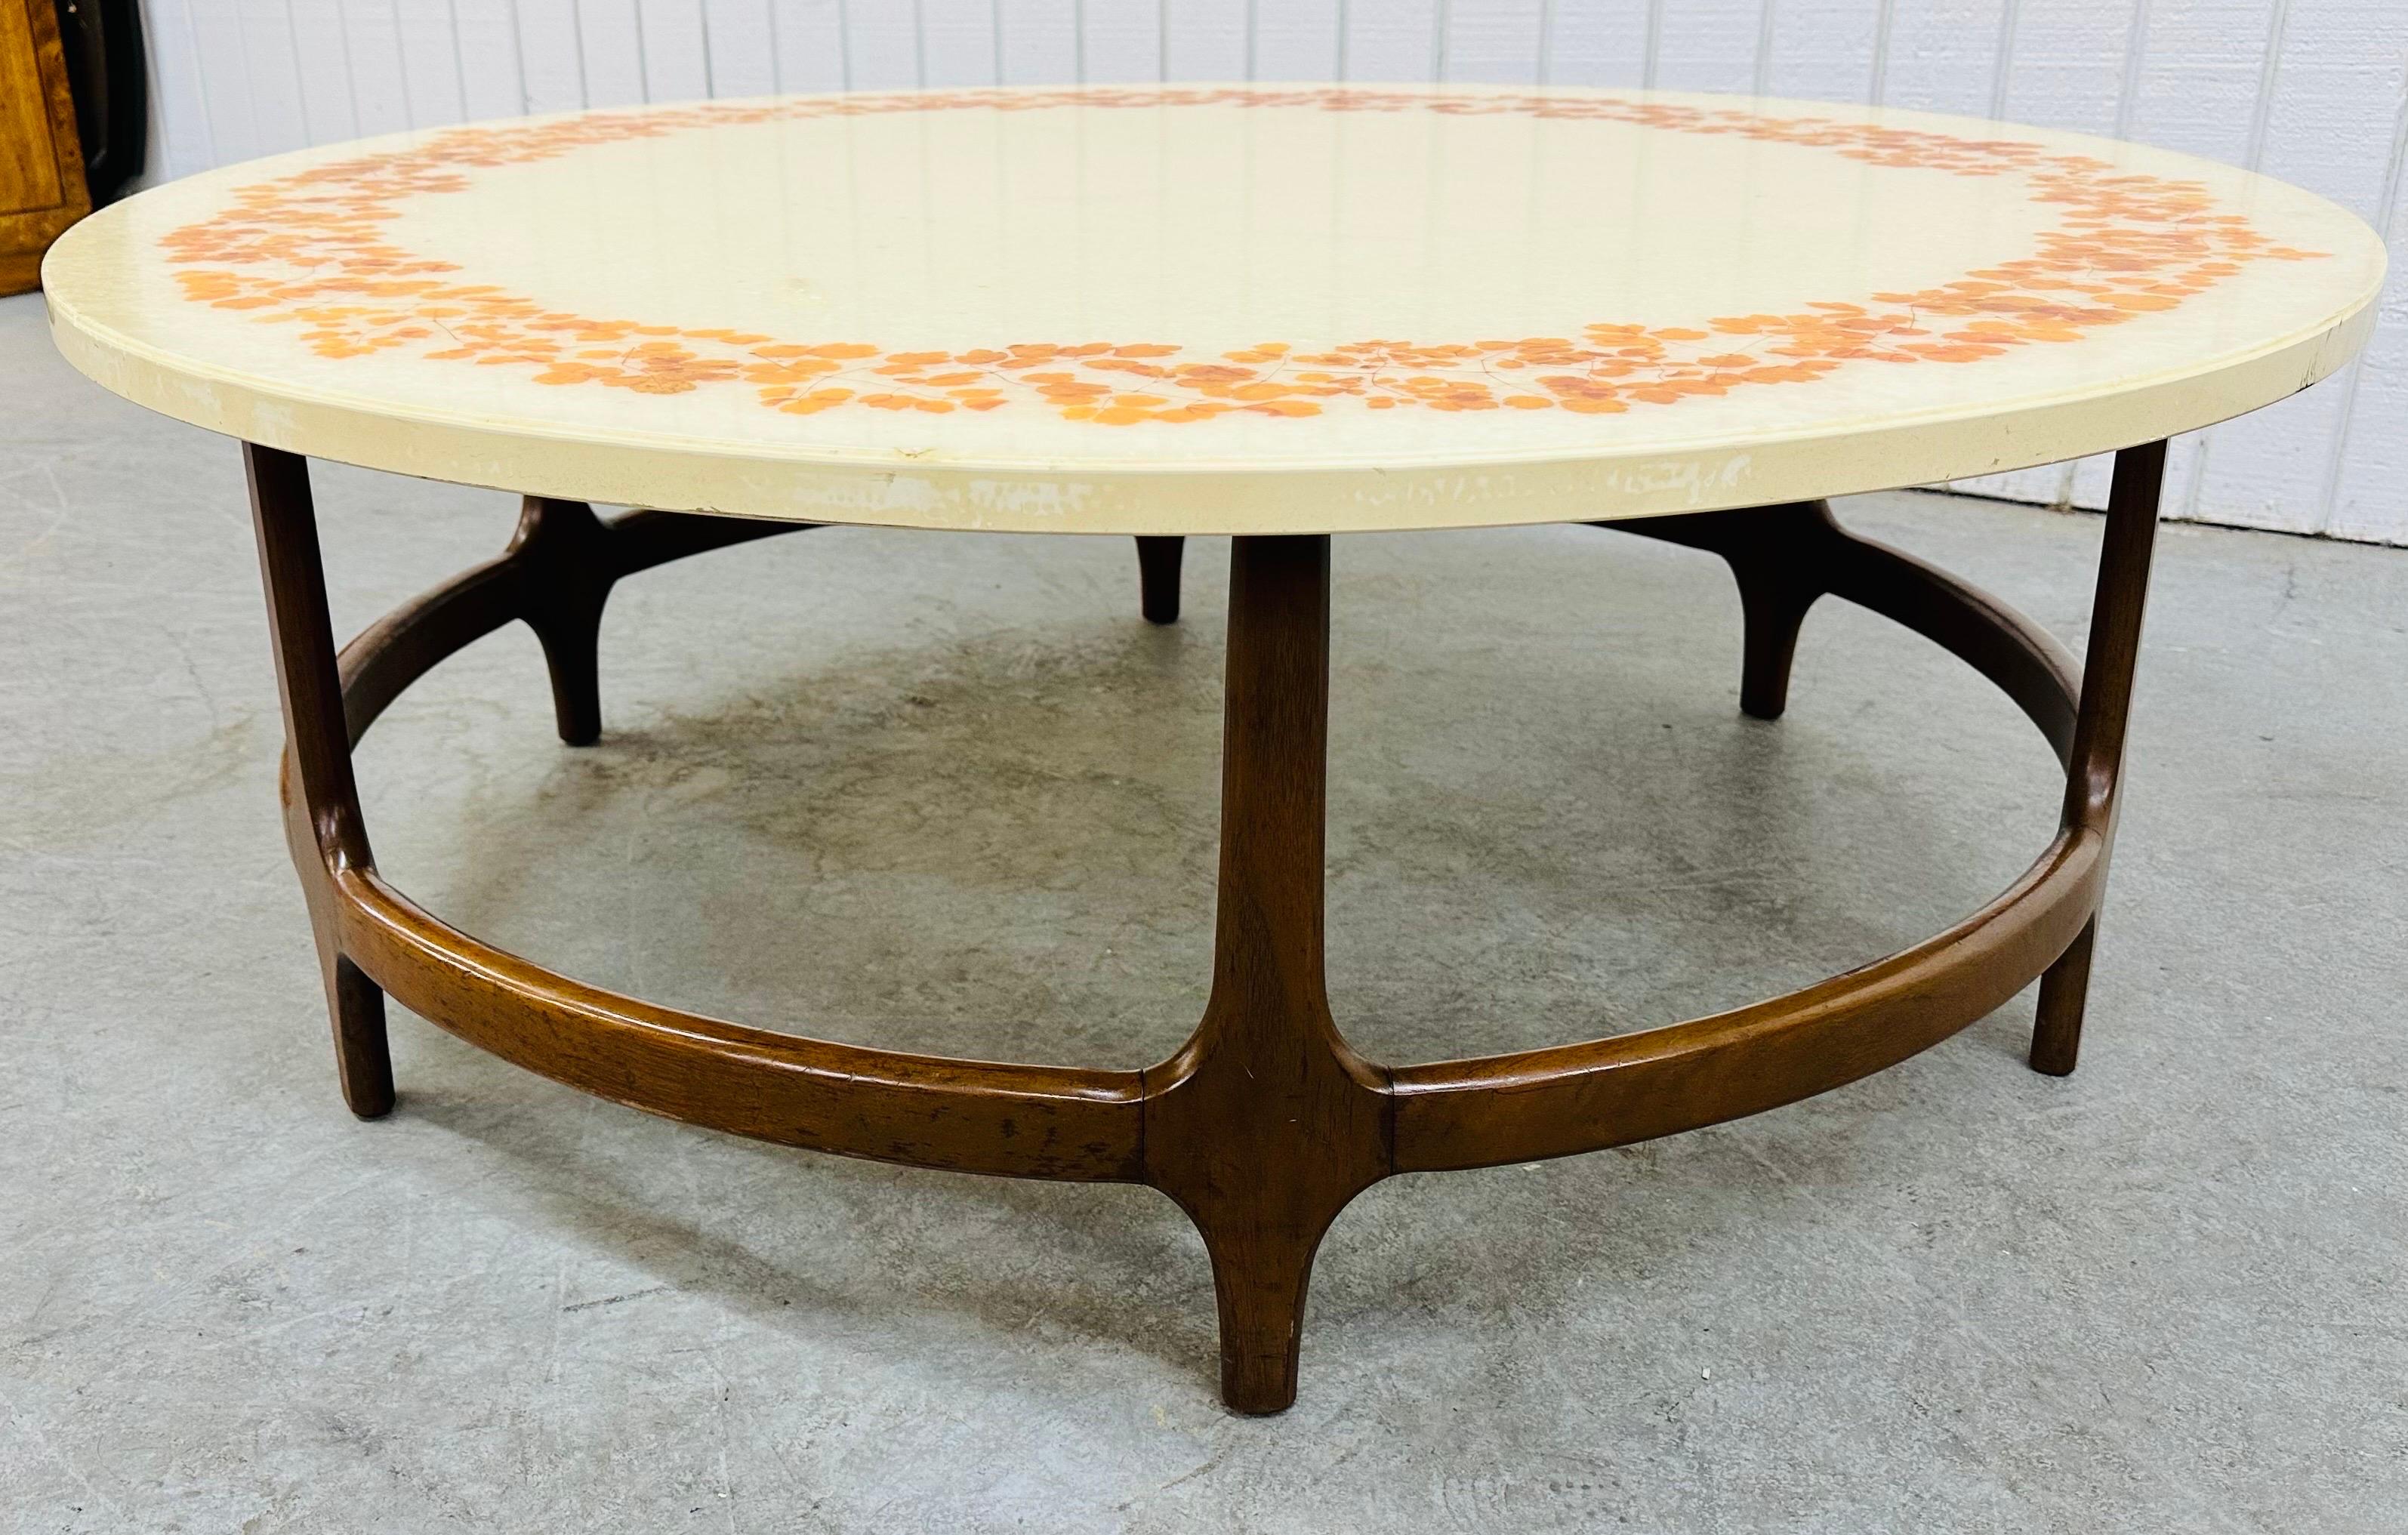 This listing is for a Mid-Century Modern Round Decorative Walnut Coffee Table. Featuring a round top with decorative sparkled leaves, sculpted wood base, with a beautiful walnut finish. This is an exceptional combination of quality and design!